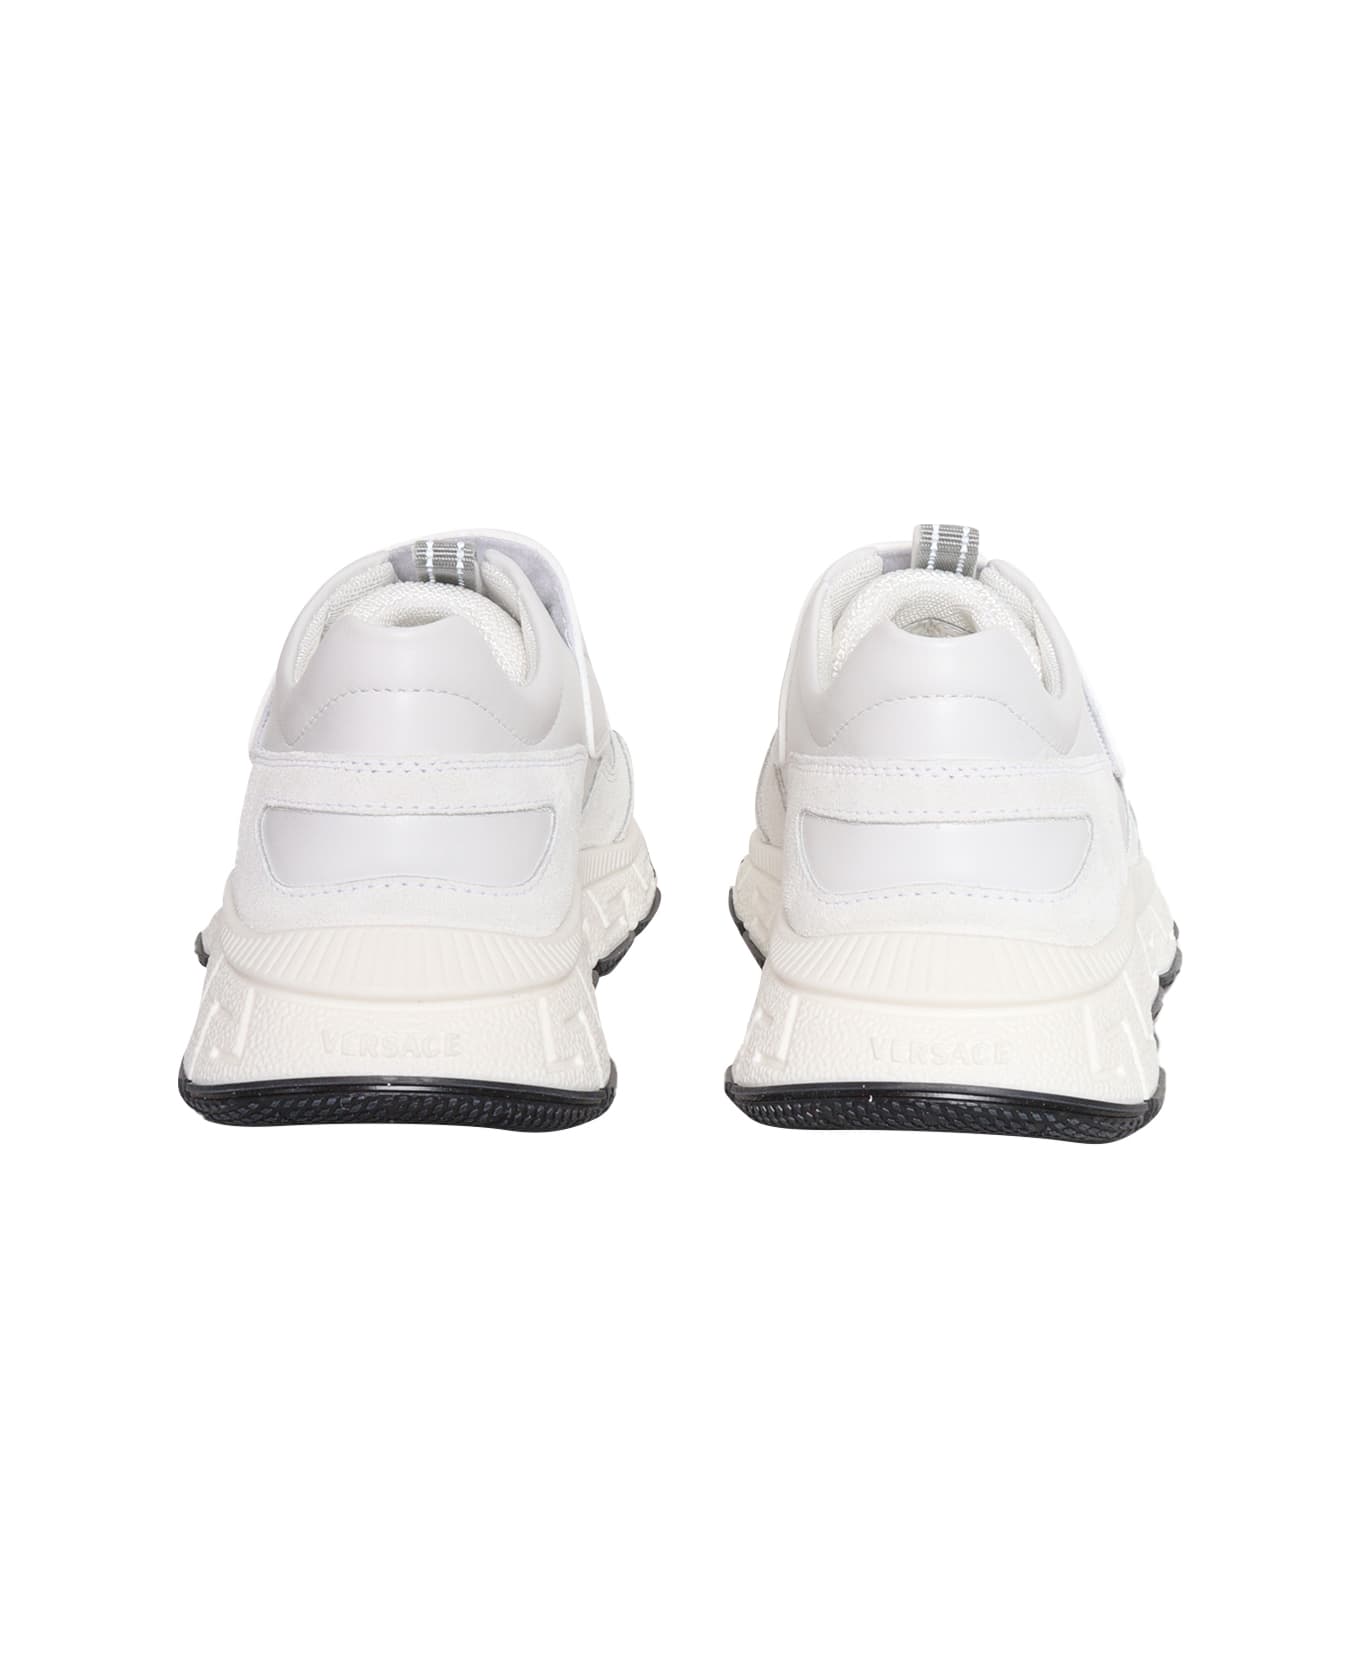 Versace White Leather Sneakers - WHITE